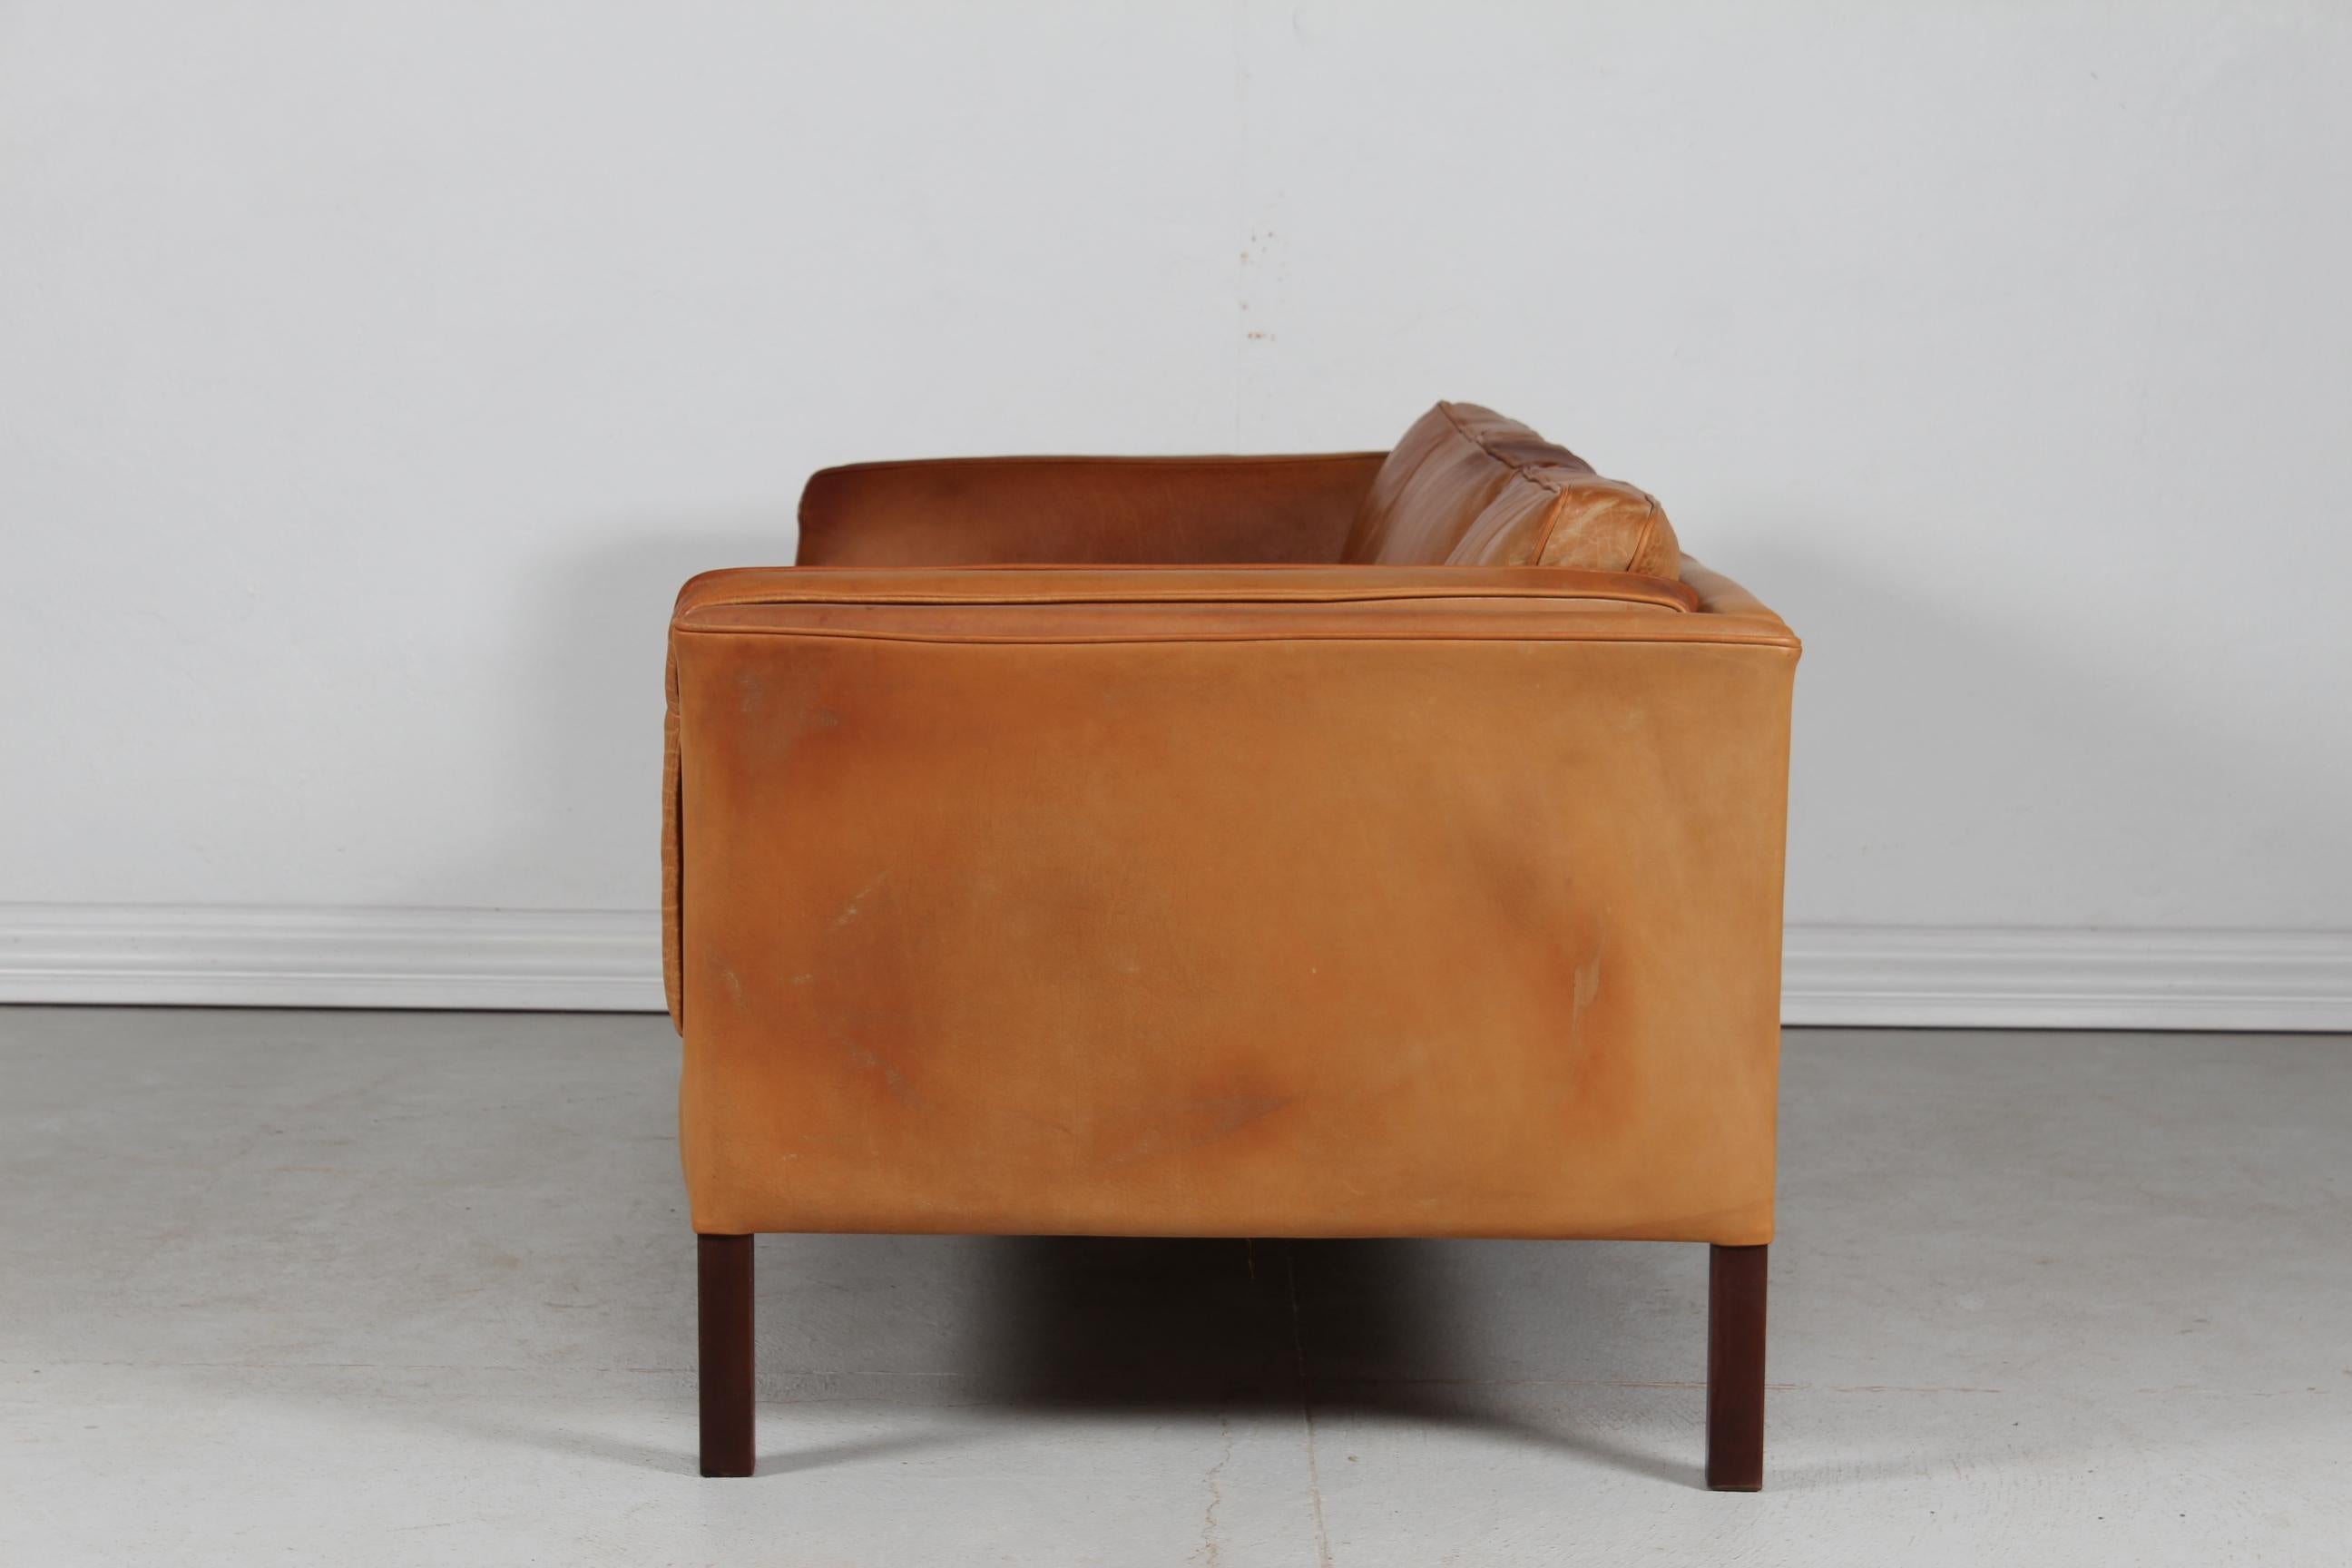 Late 20th Century Danish Modern 3-Seat Sofa with Patinated Cognac-Colored Leather 1970s by Stouby